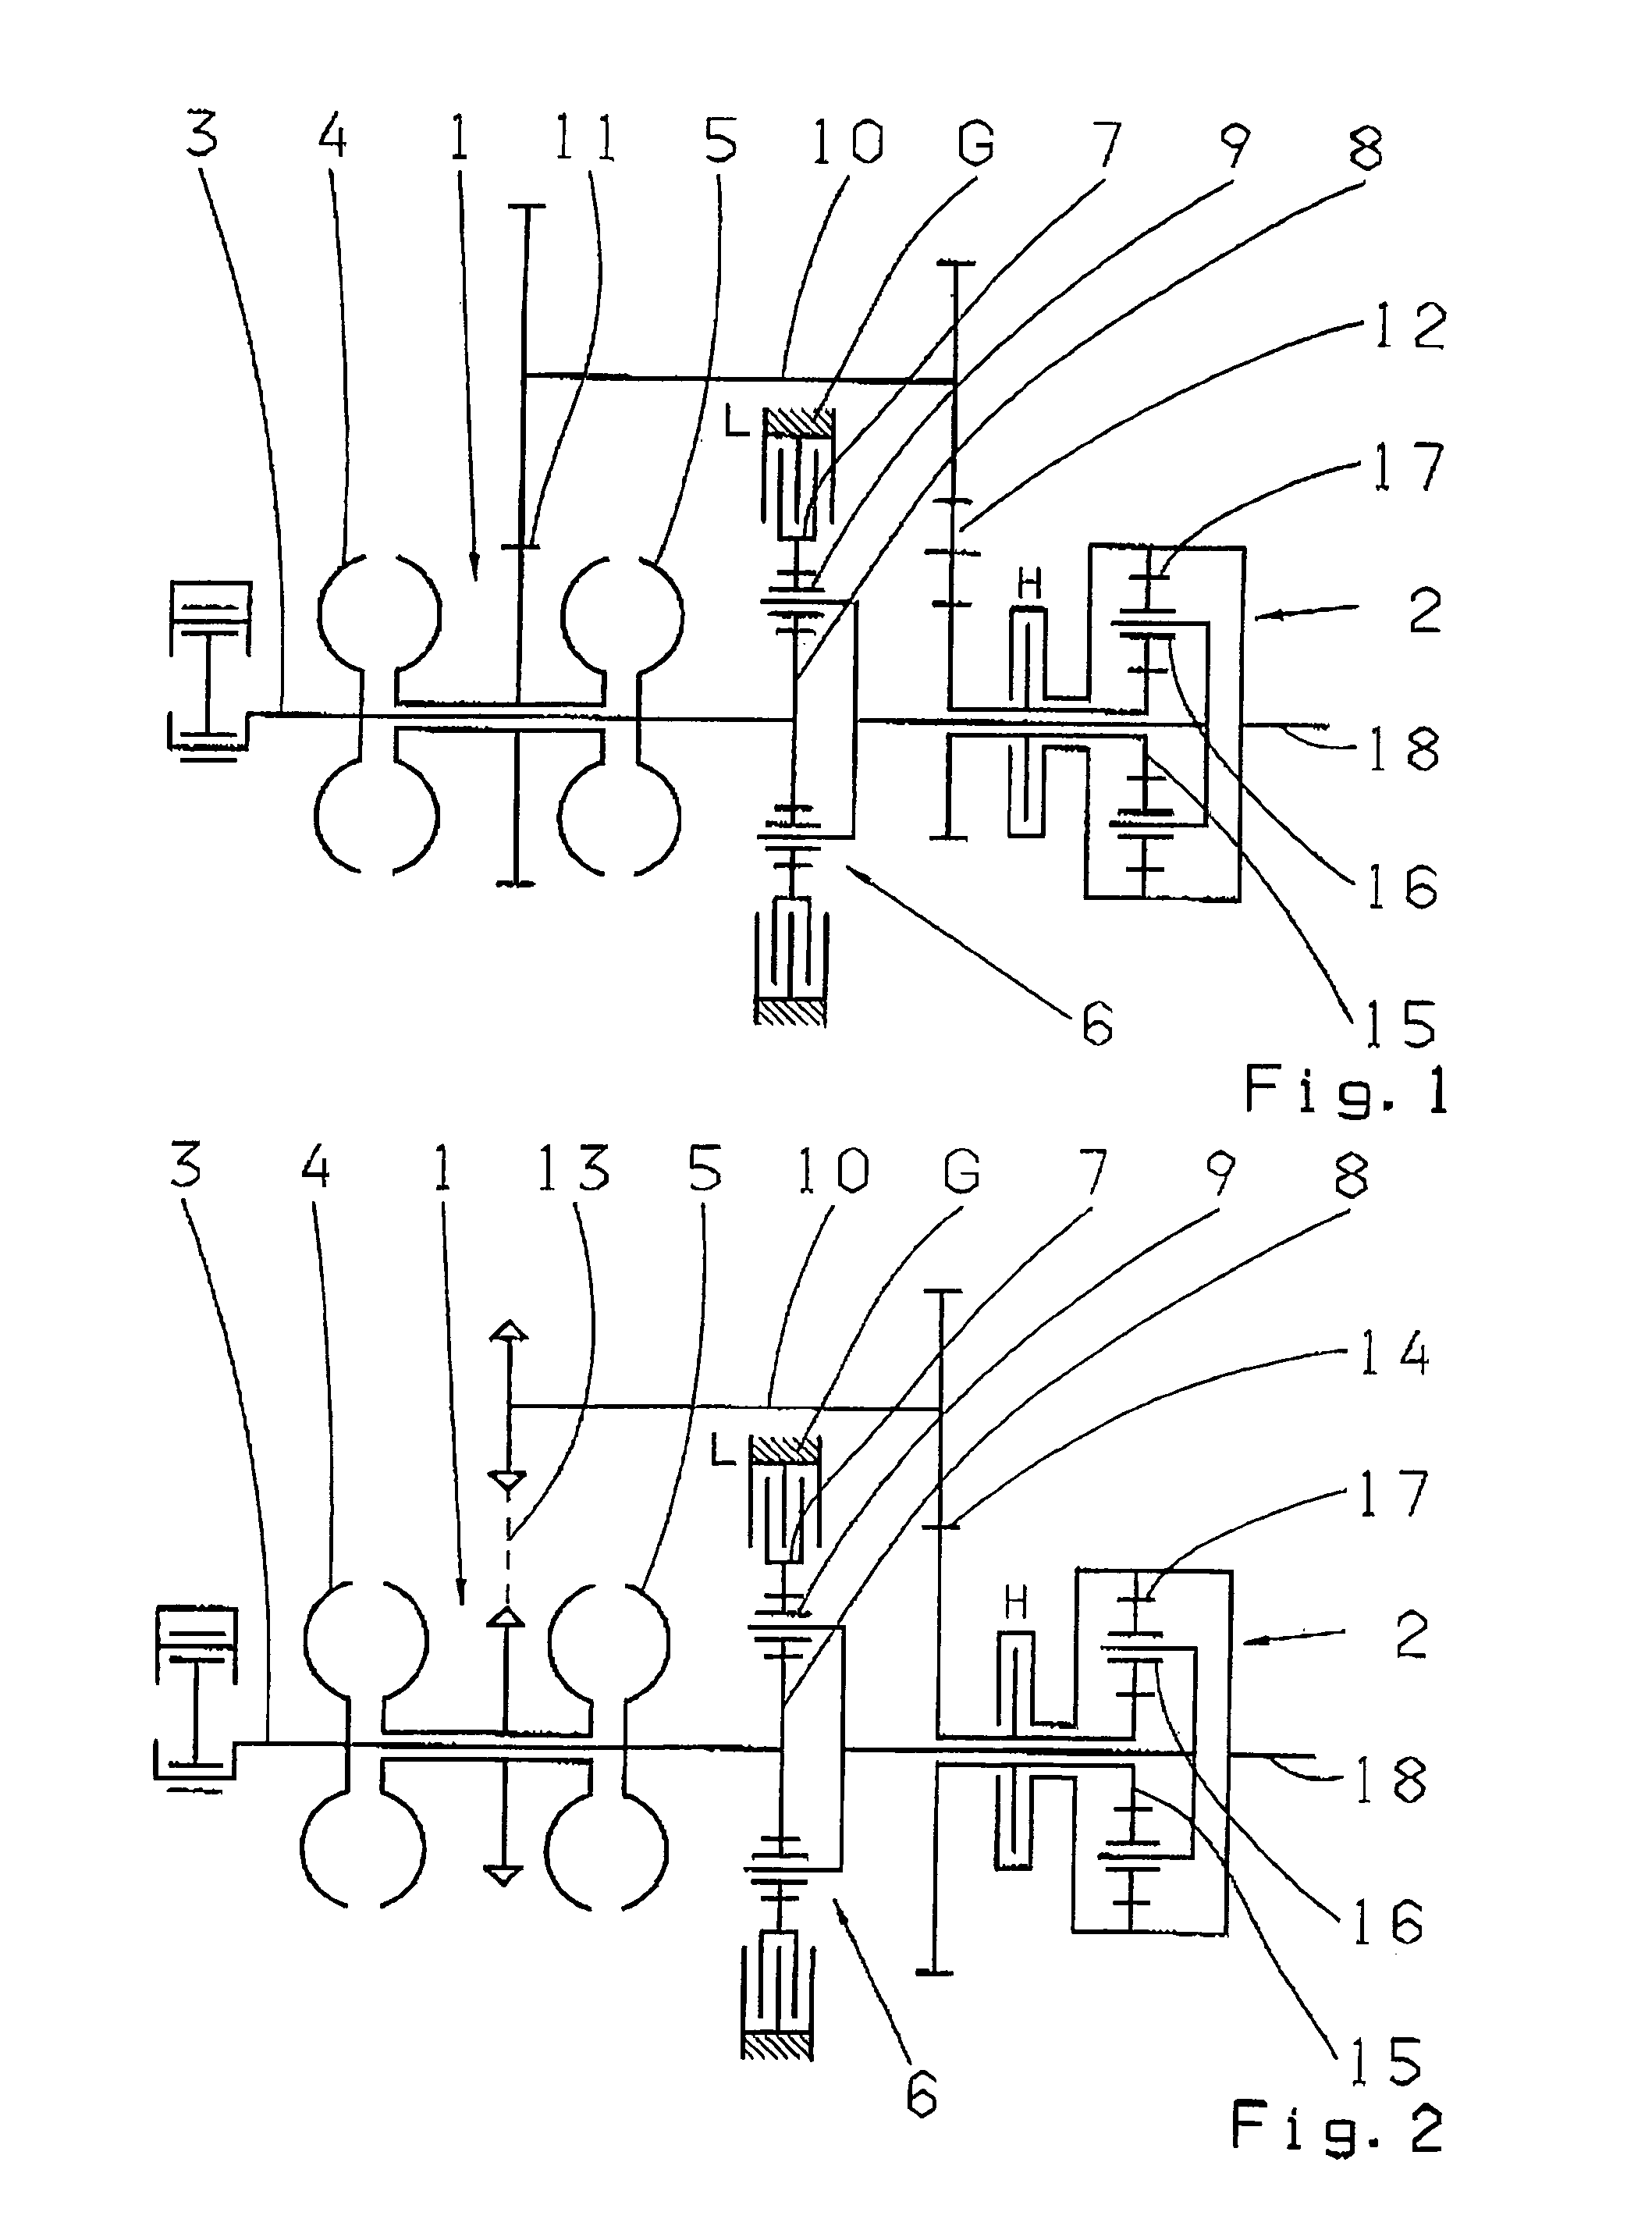 Split power transmission to include a variable drive